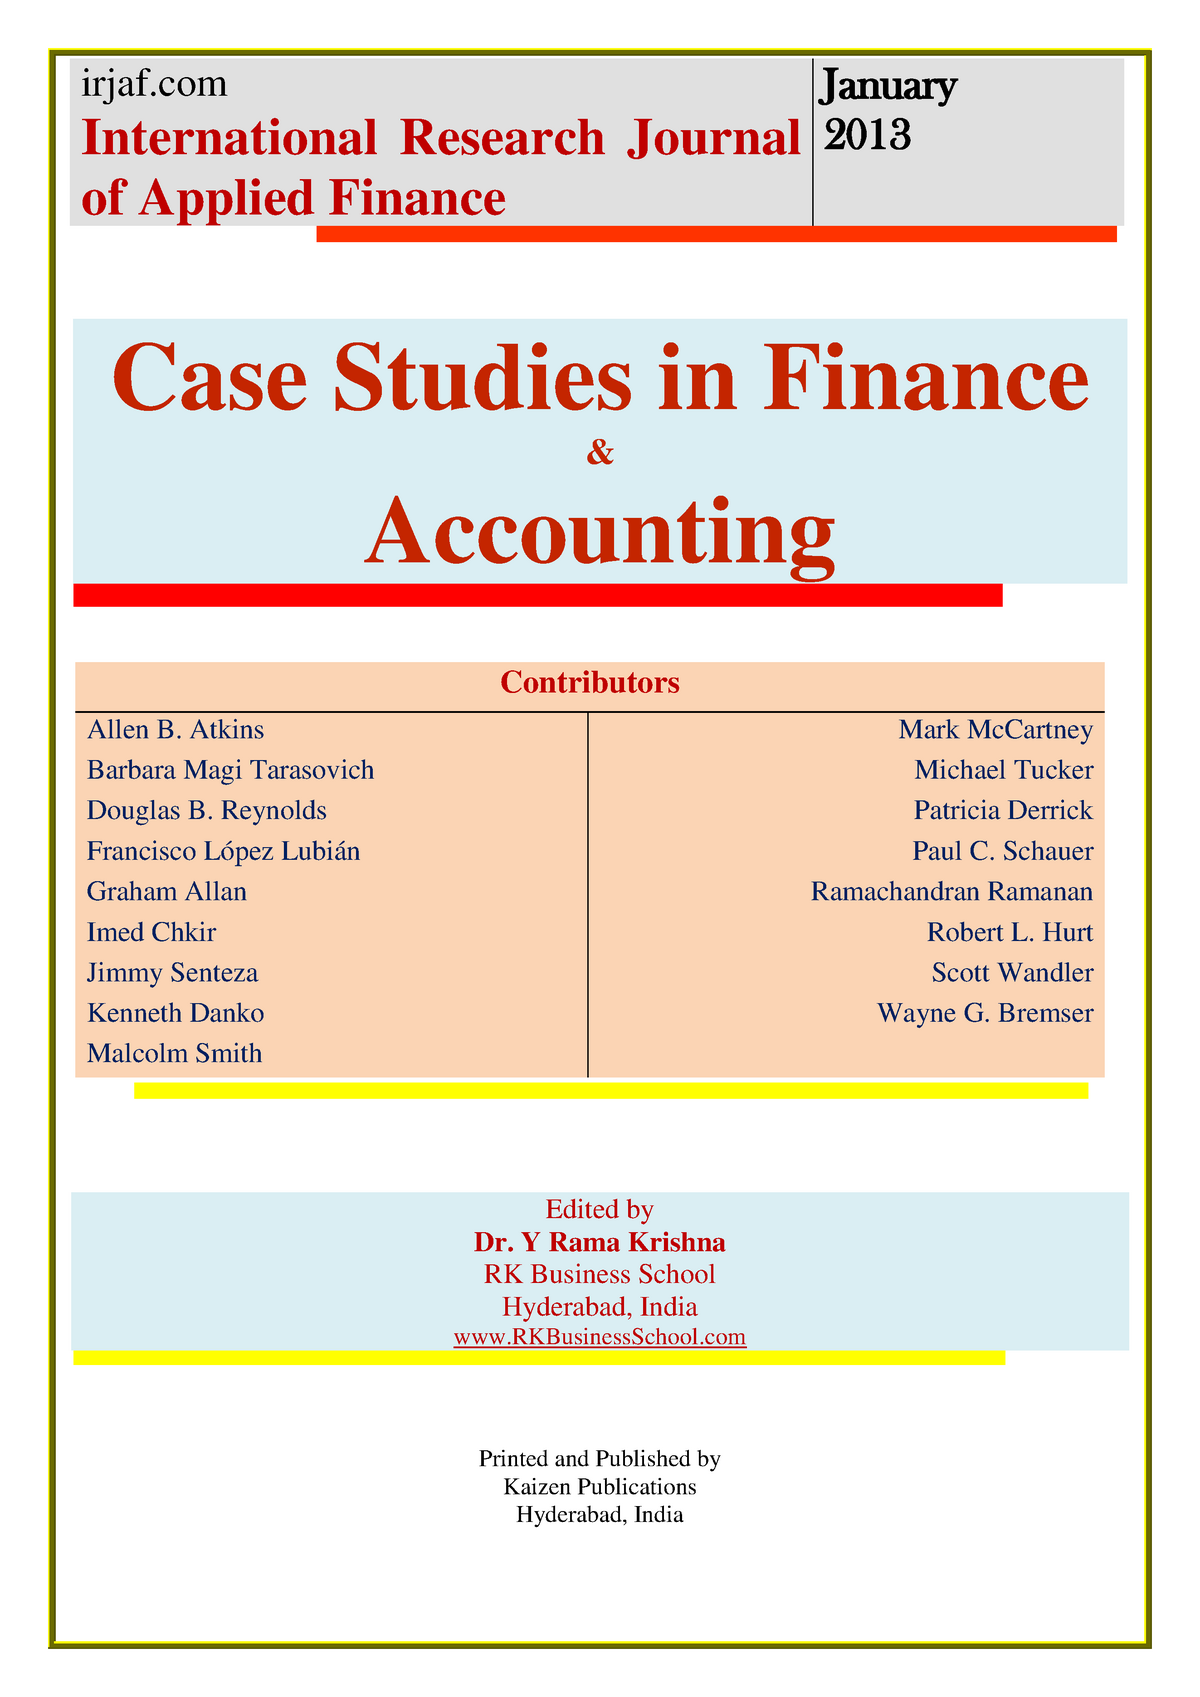 forensic accounting case study interview